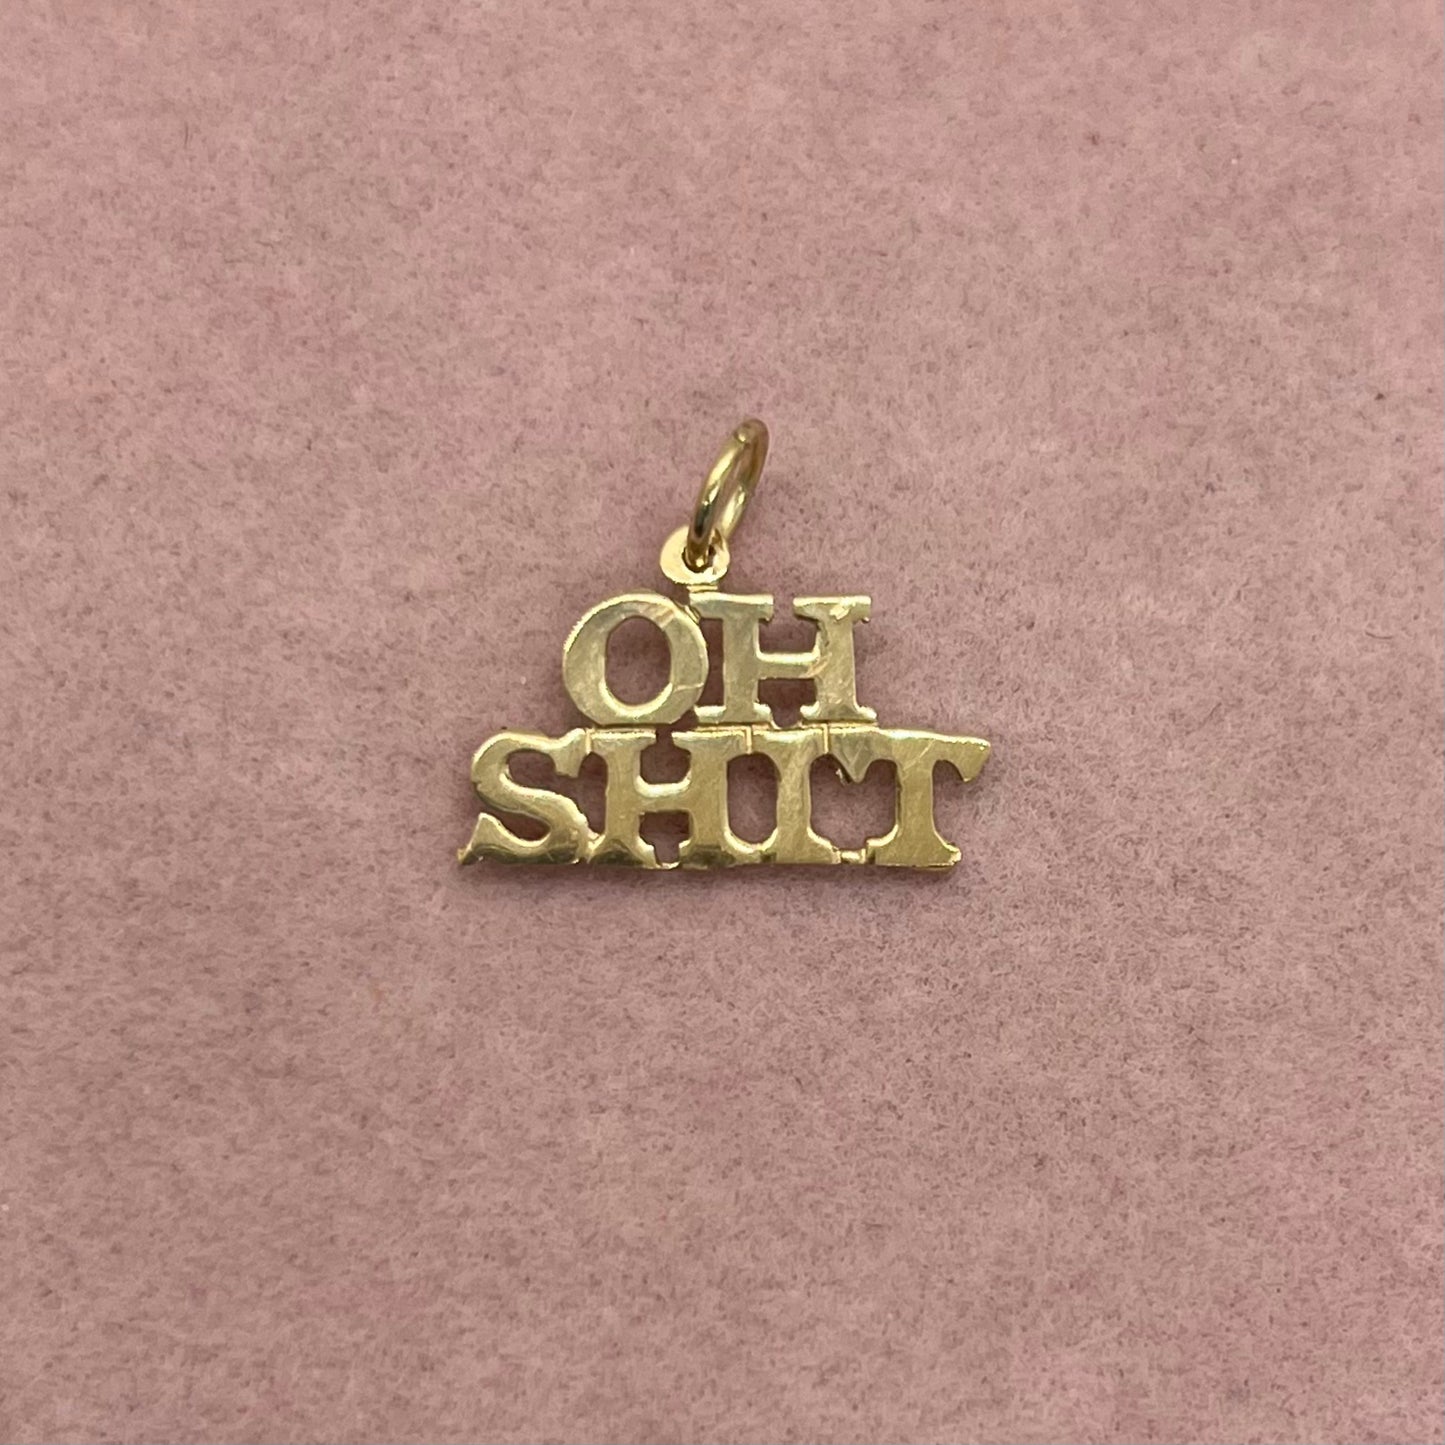 'Oh Shit' Charm (Pre-Order)